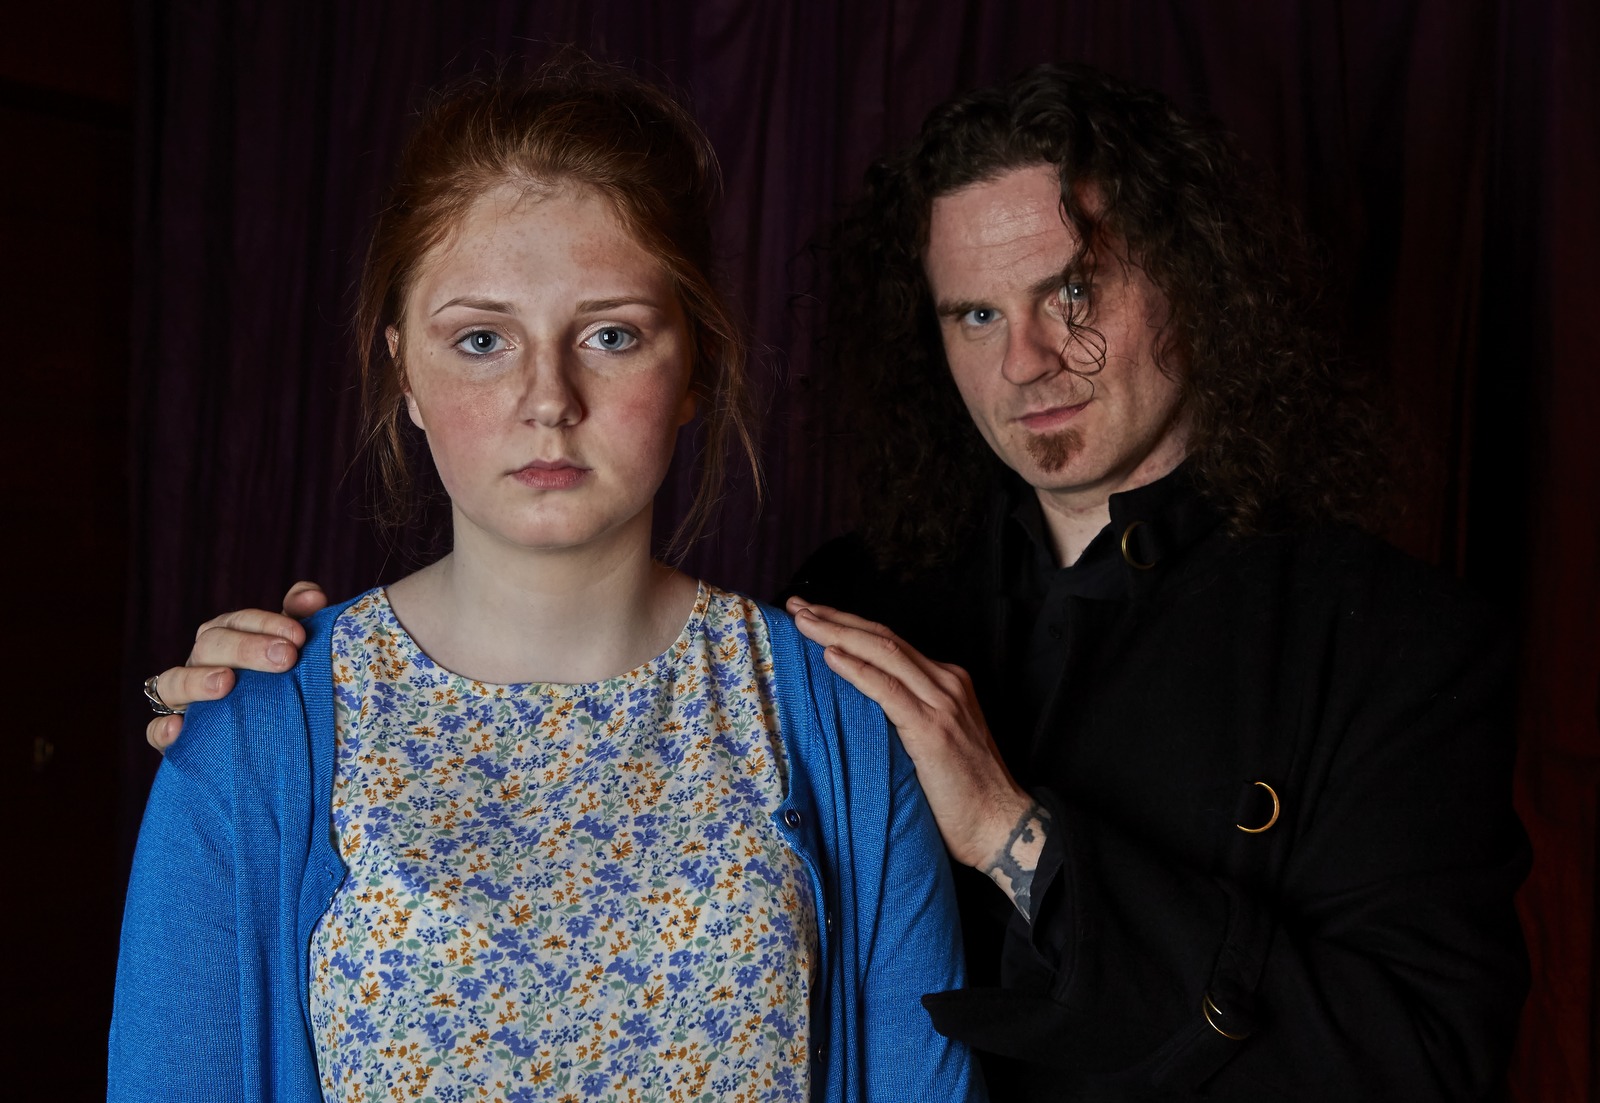 Caitlin Blackwood and Billy Kirkwood Filming a promotional 'Cops and Monsters' video - 24 May 2015